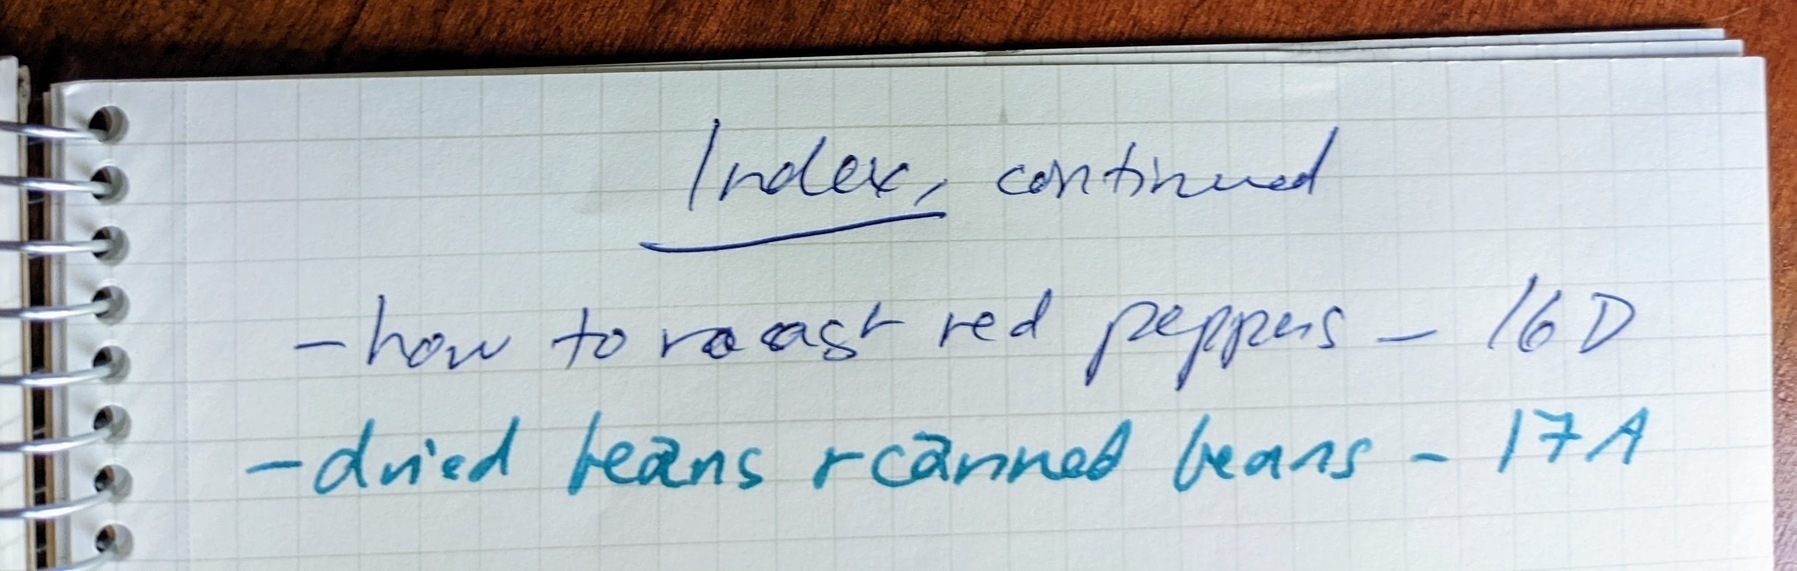 handwritten index page with a tab labeled index, and entries listed next to their quadrant